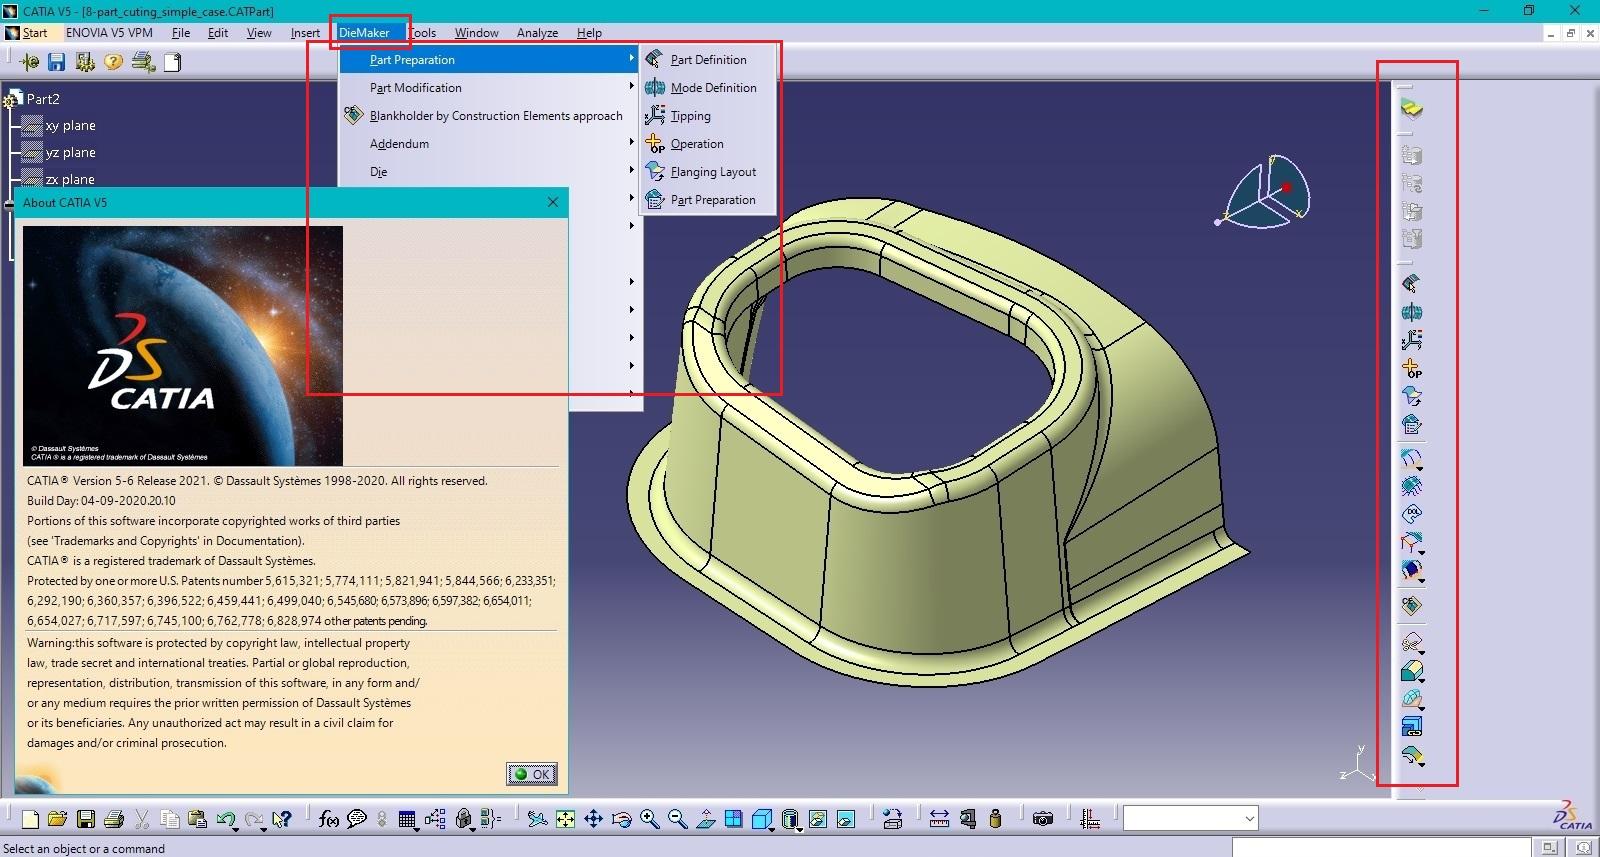 Working with ESI PAM-DIEMAKER 2021.0 for CATIA V5 R28-R30 full